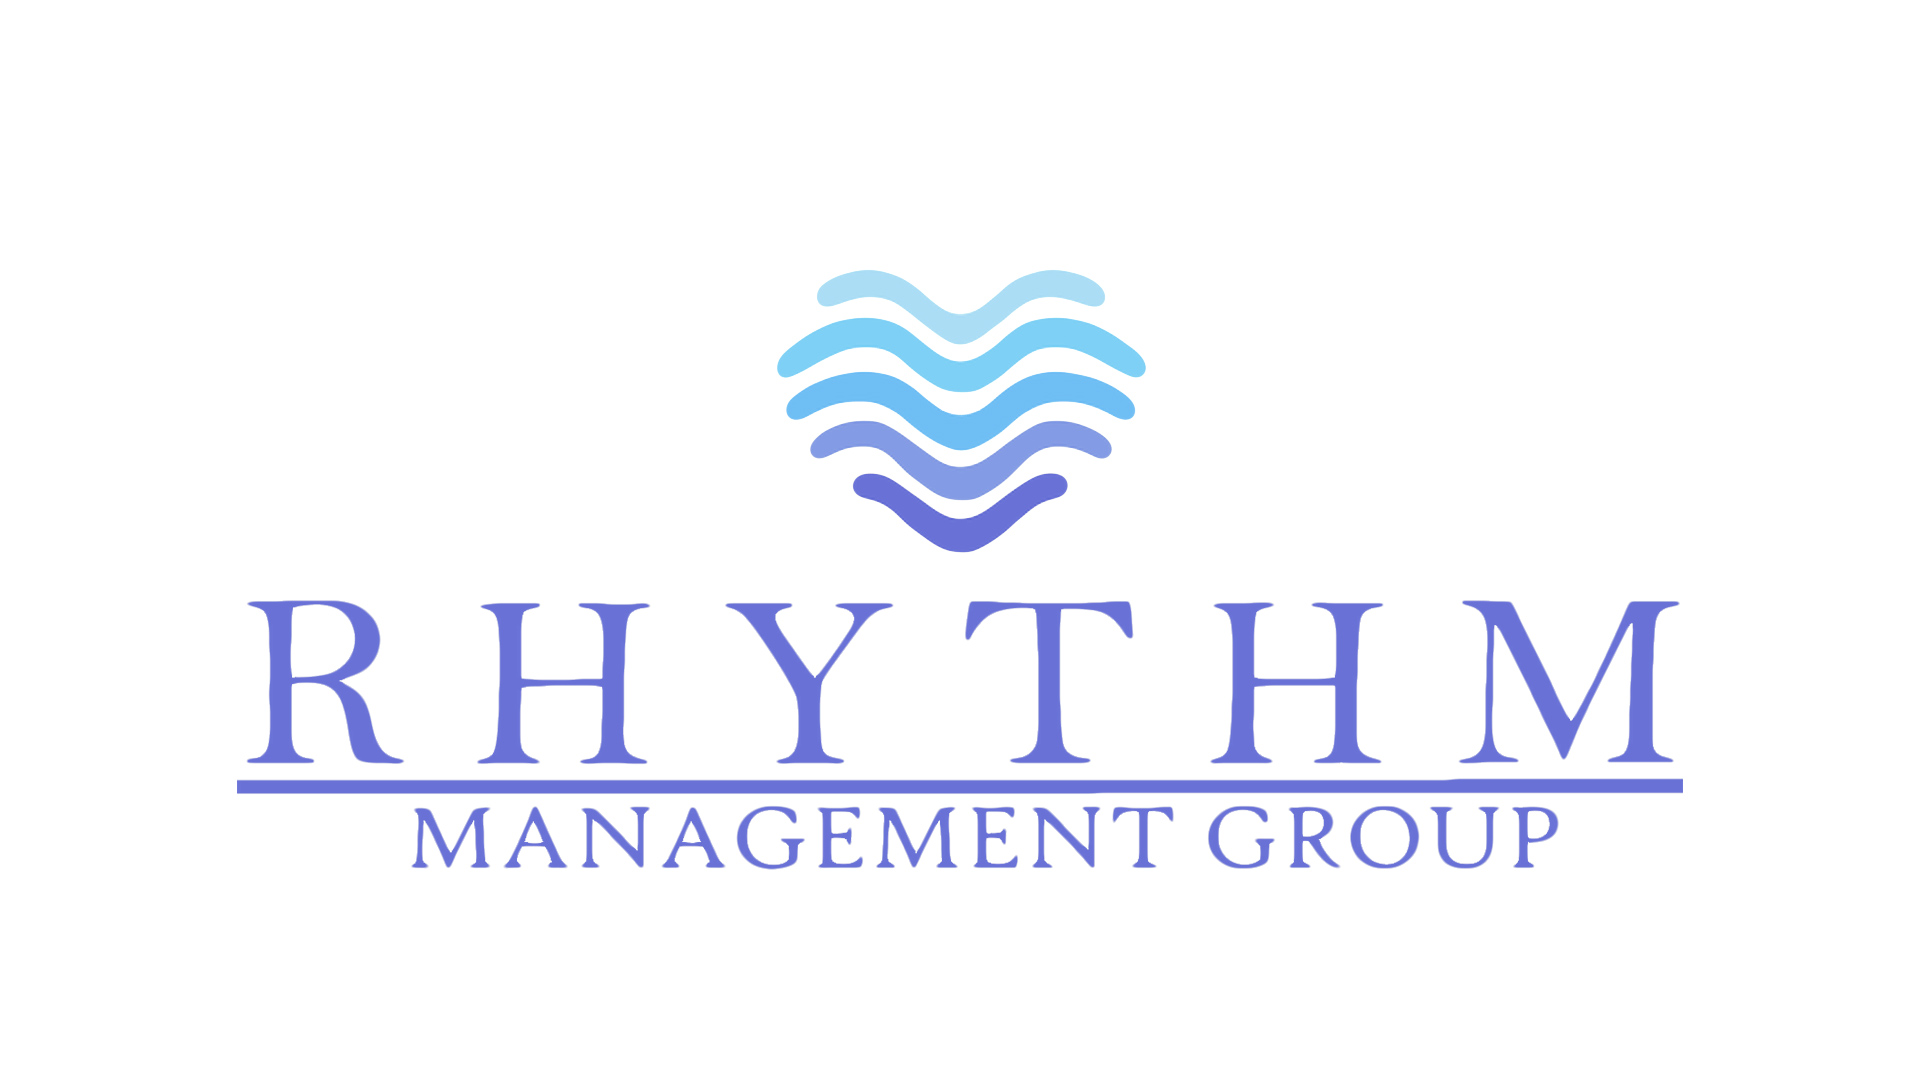 Sage Growth Partners Selected by Rhythm Management Group as Marketing Agency of Record